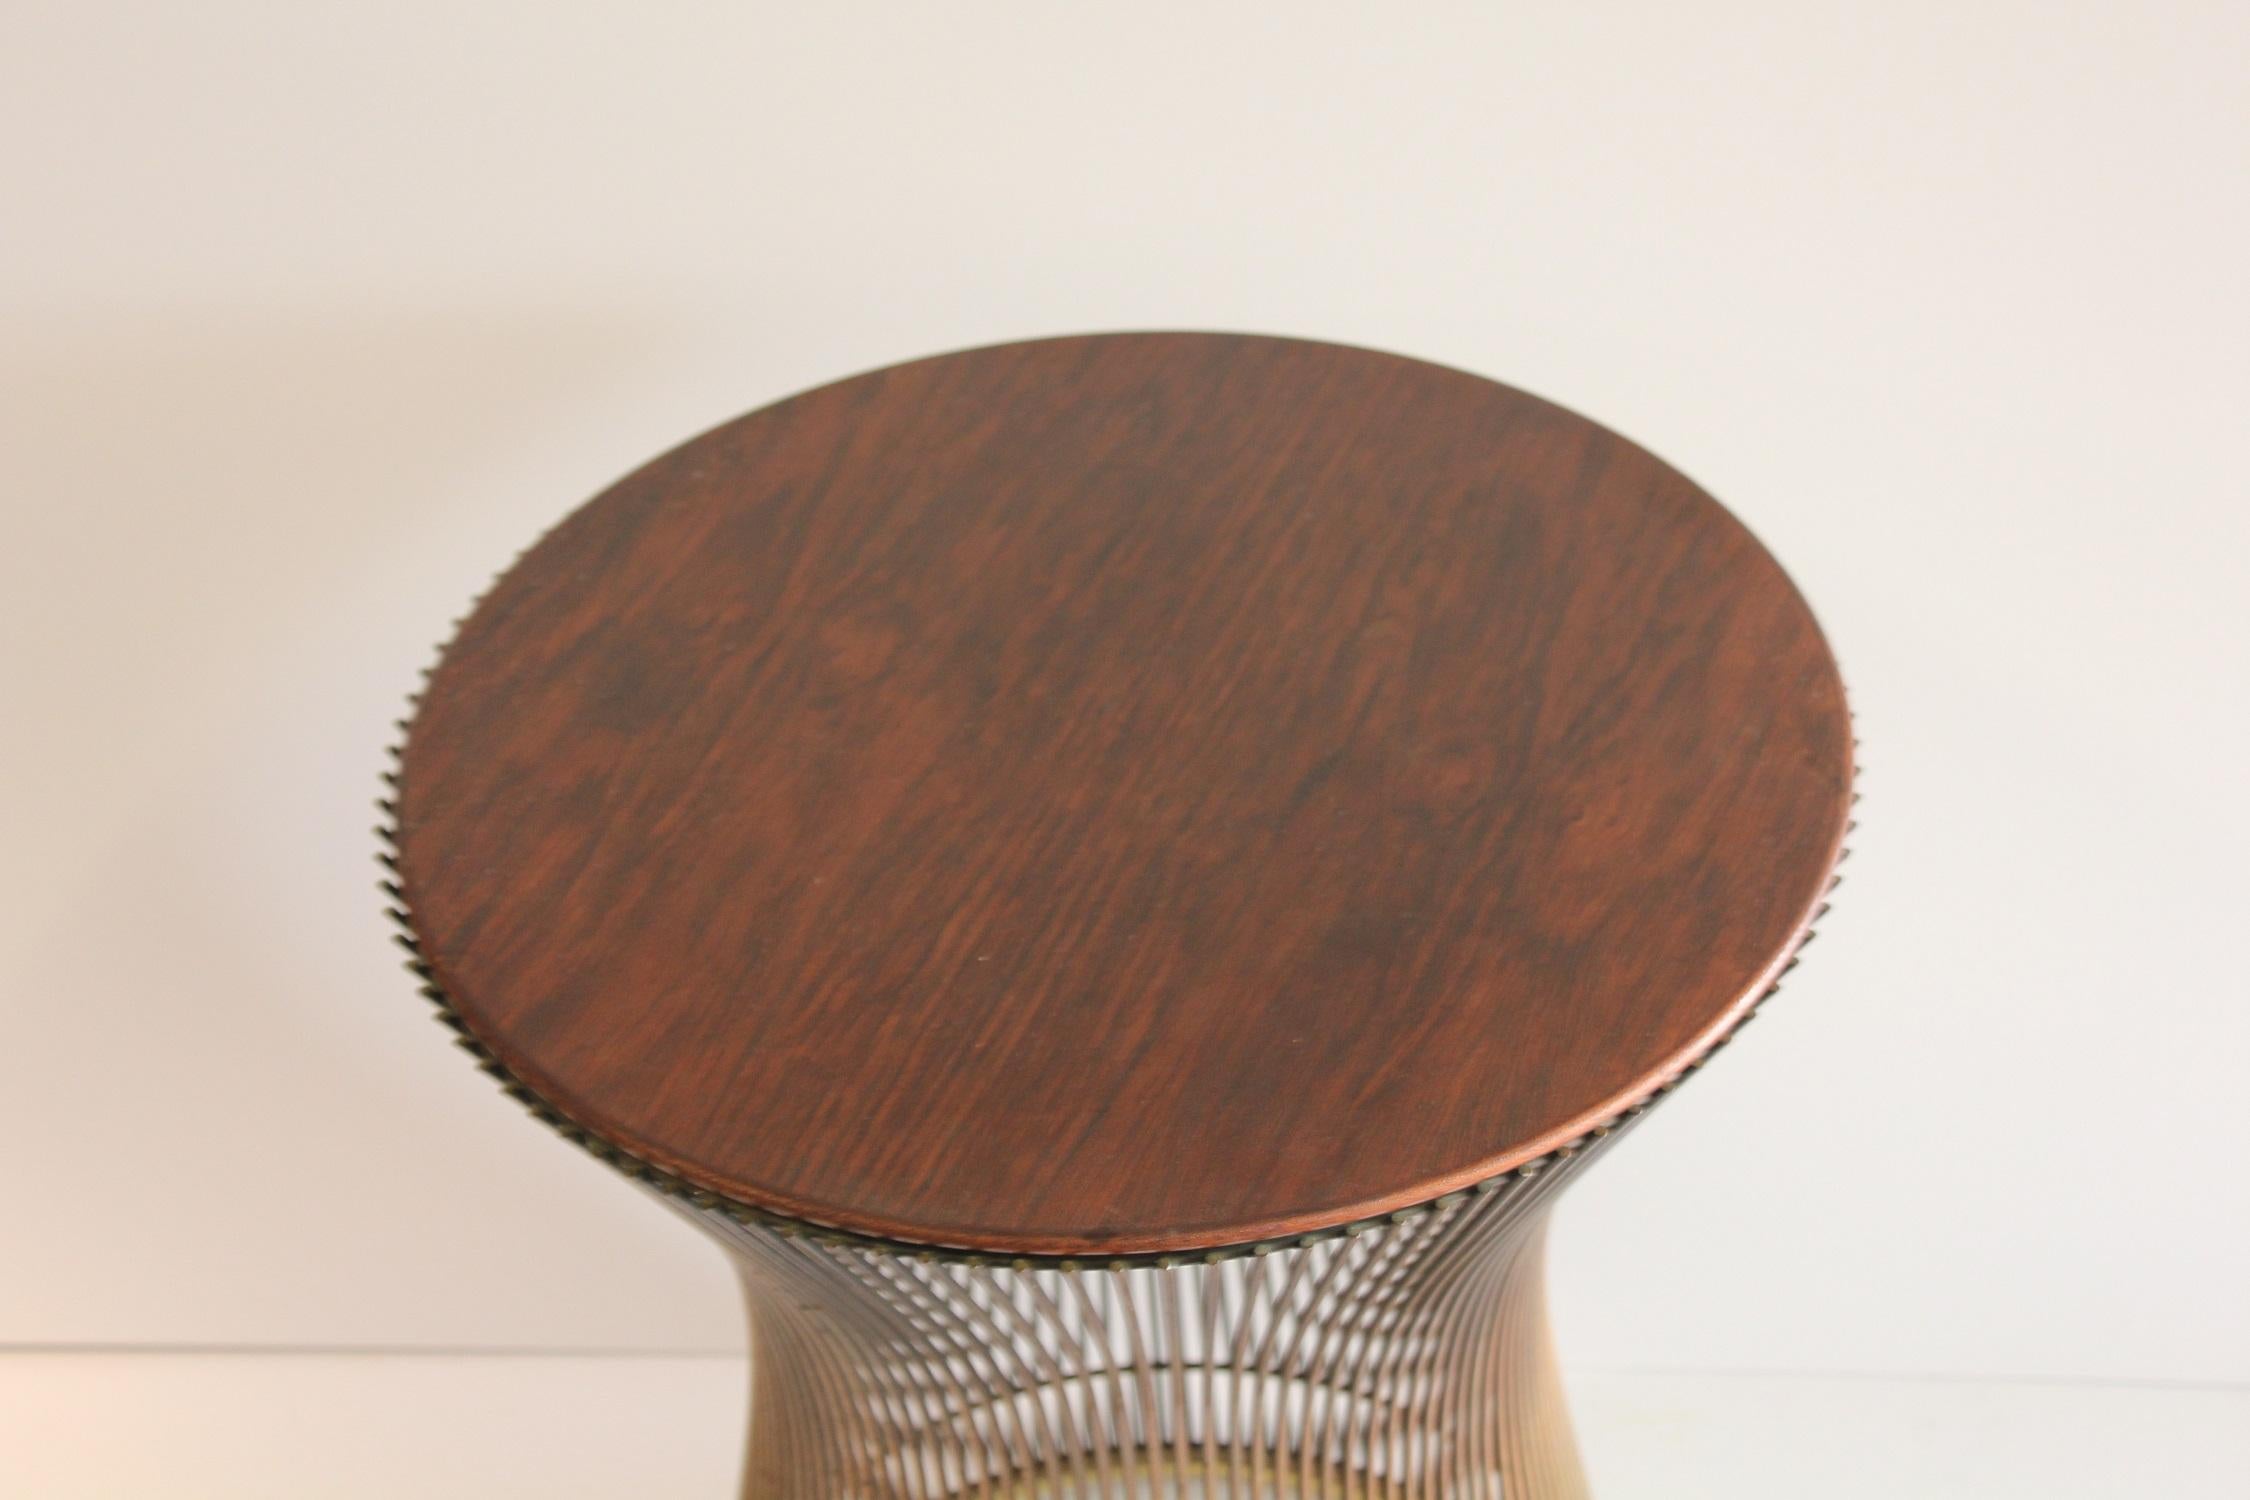 1960s bronze side table by Warren Platner for Knoll with wood top. It has original Knoll sticker.